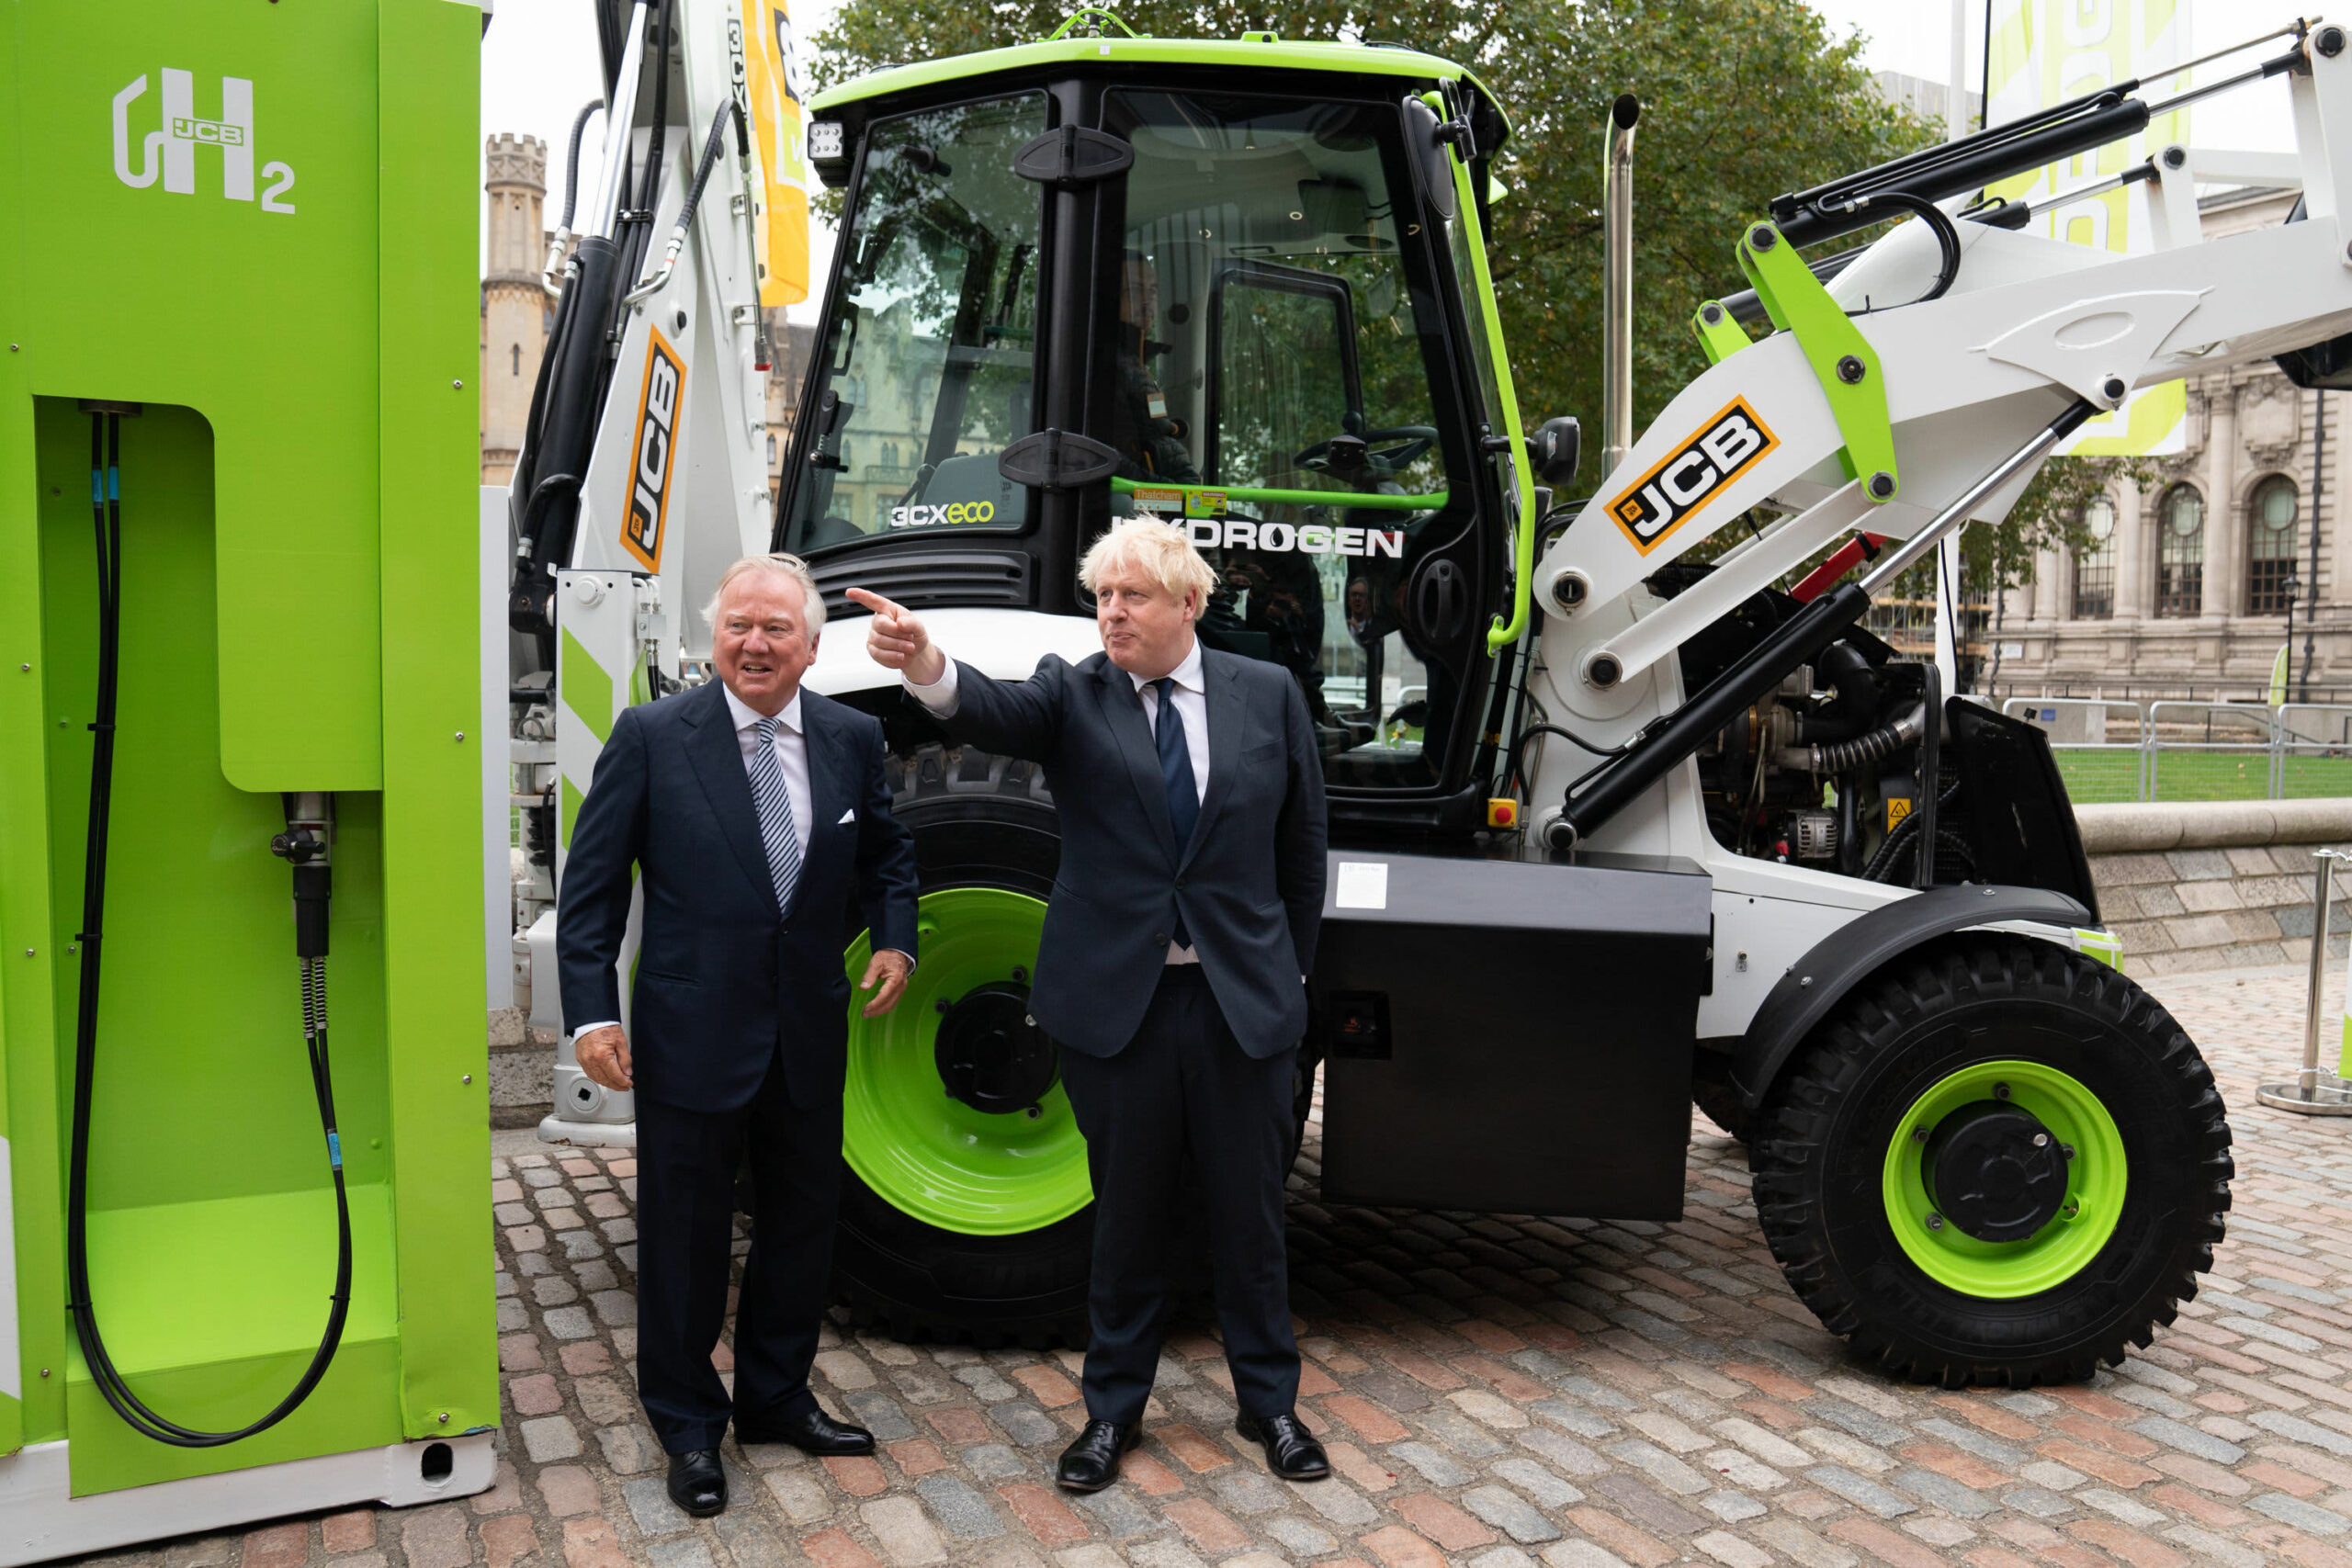 JCB signs deal to import green hydrogen from Australia